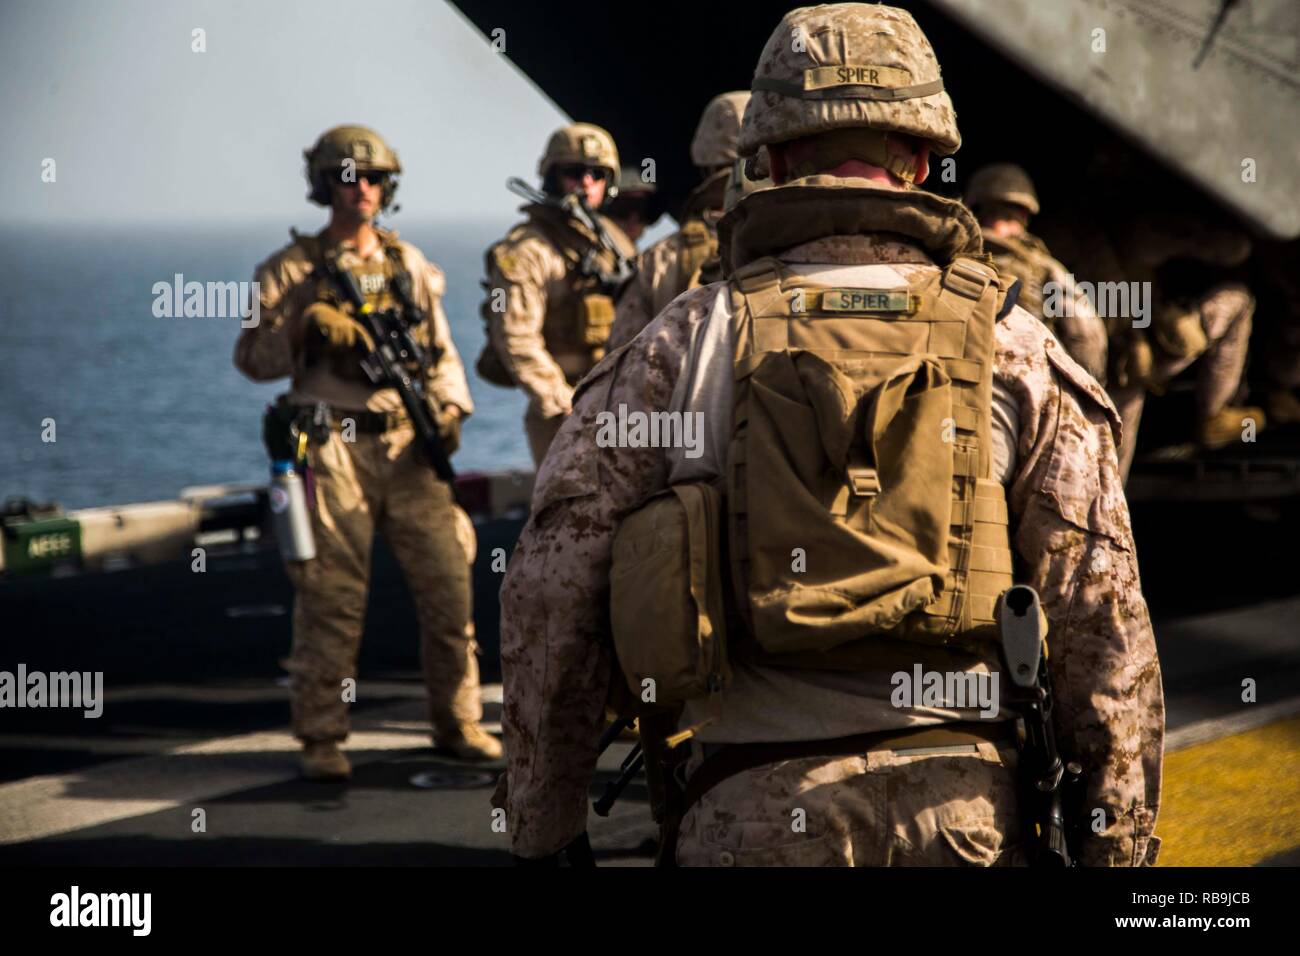 ARABIAN SEA - U.S. Marines and Sailors with Lima Company, Battalion Landing Team 3/1, 13th Marine Expeditionary Unit (MEU), board a CH-53E Super Stallion during a Tactical Recovery of Aircraft Personnel training exercise aboard the Wasp-class amphibious assault ship USS Essex (LHD 2), Jan. 05, 2019. The Essex is the flagship for the Essex Amphibious Ready Group and, with the embarked 13th MEU, is deployed to the U.S. Fifth Fleet area of operations in support of naval operations to ensure maritime stability and security in the Central Region, connecting the Mediterranean and the Pacific through Stock Photo